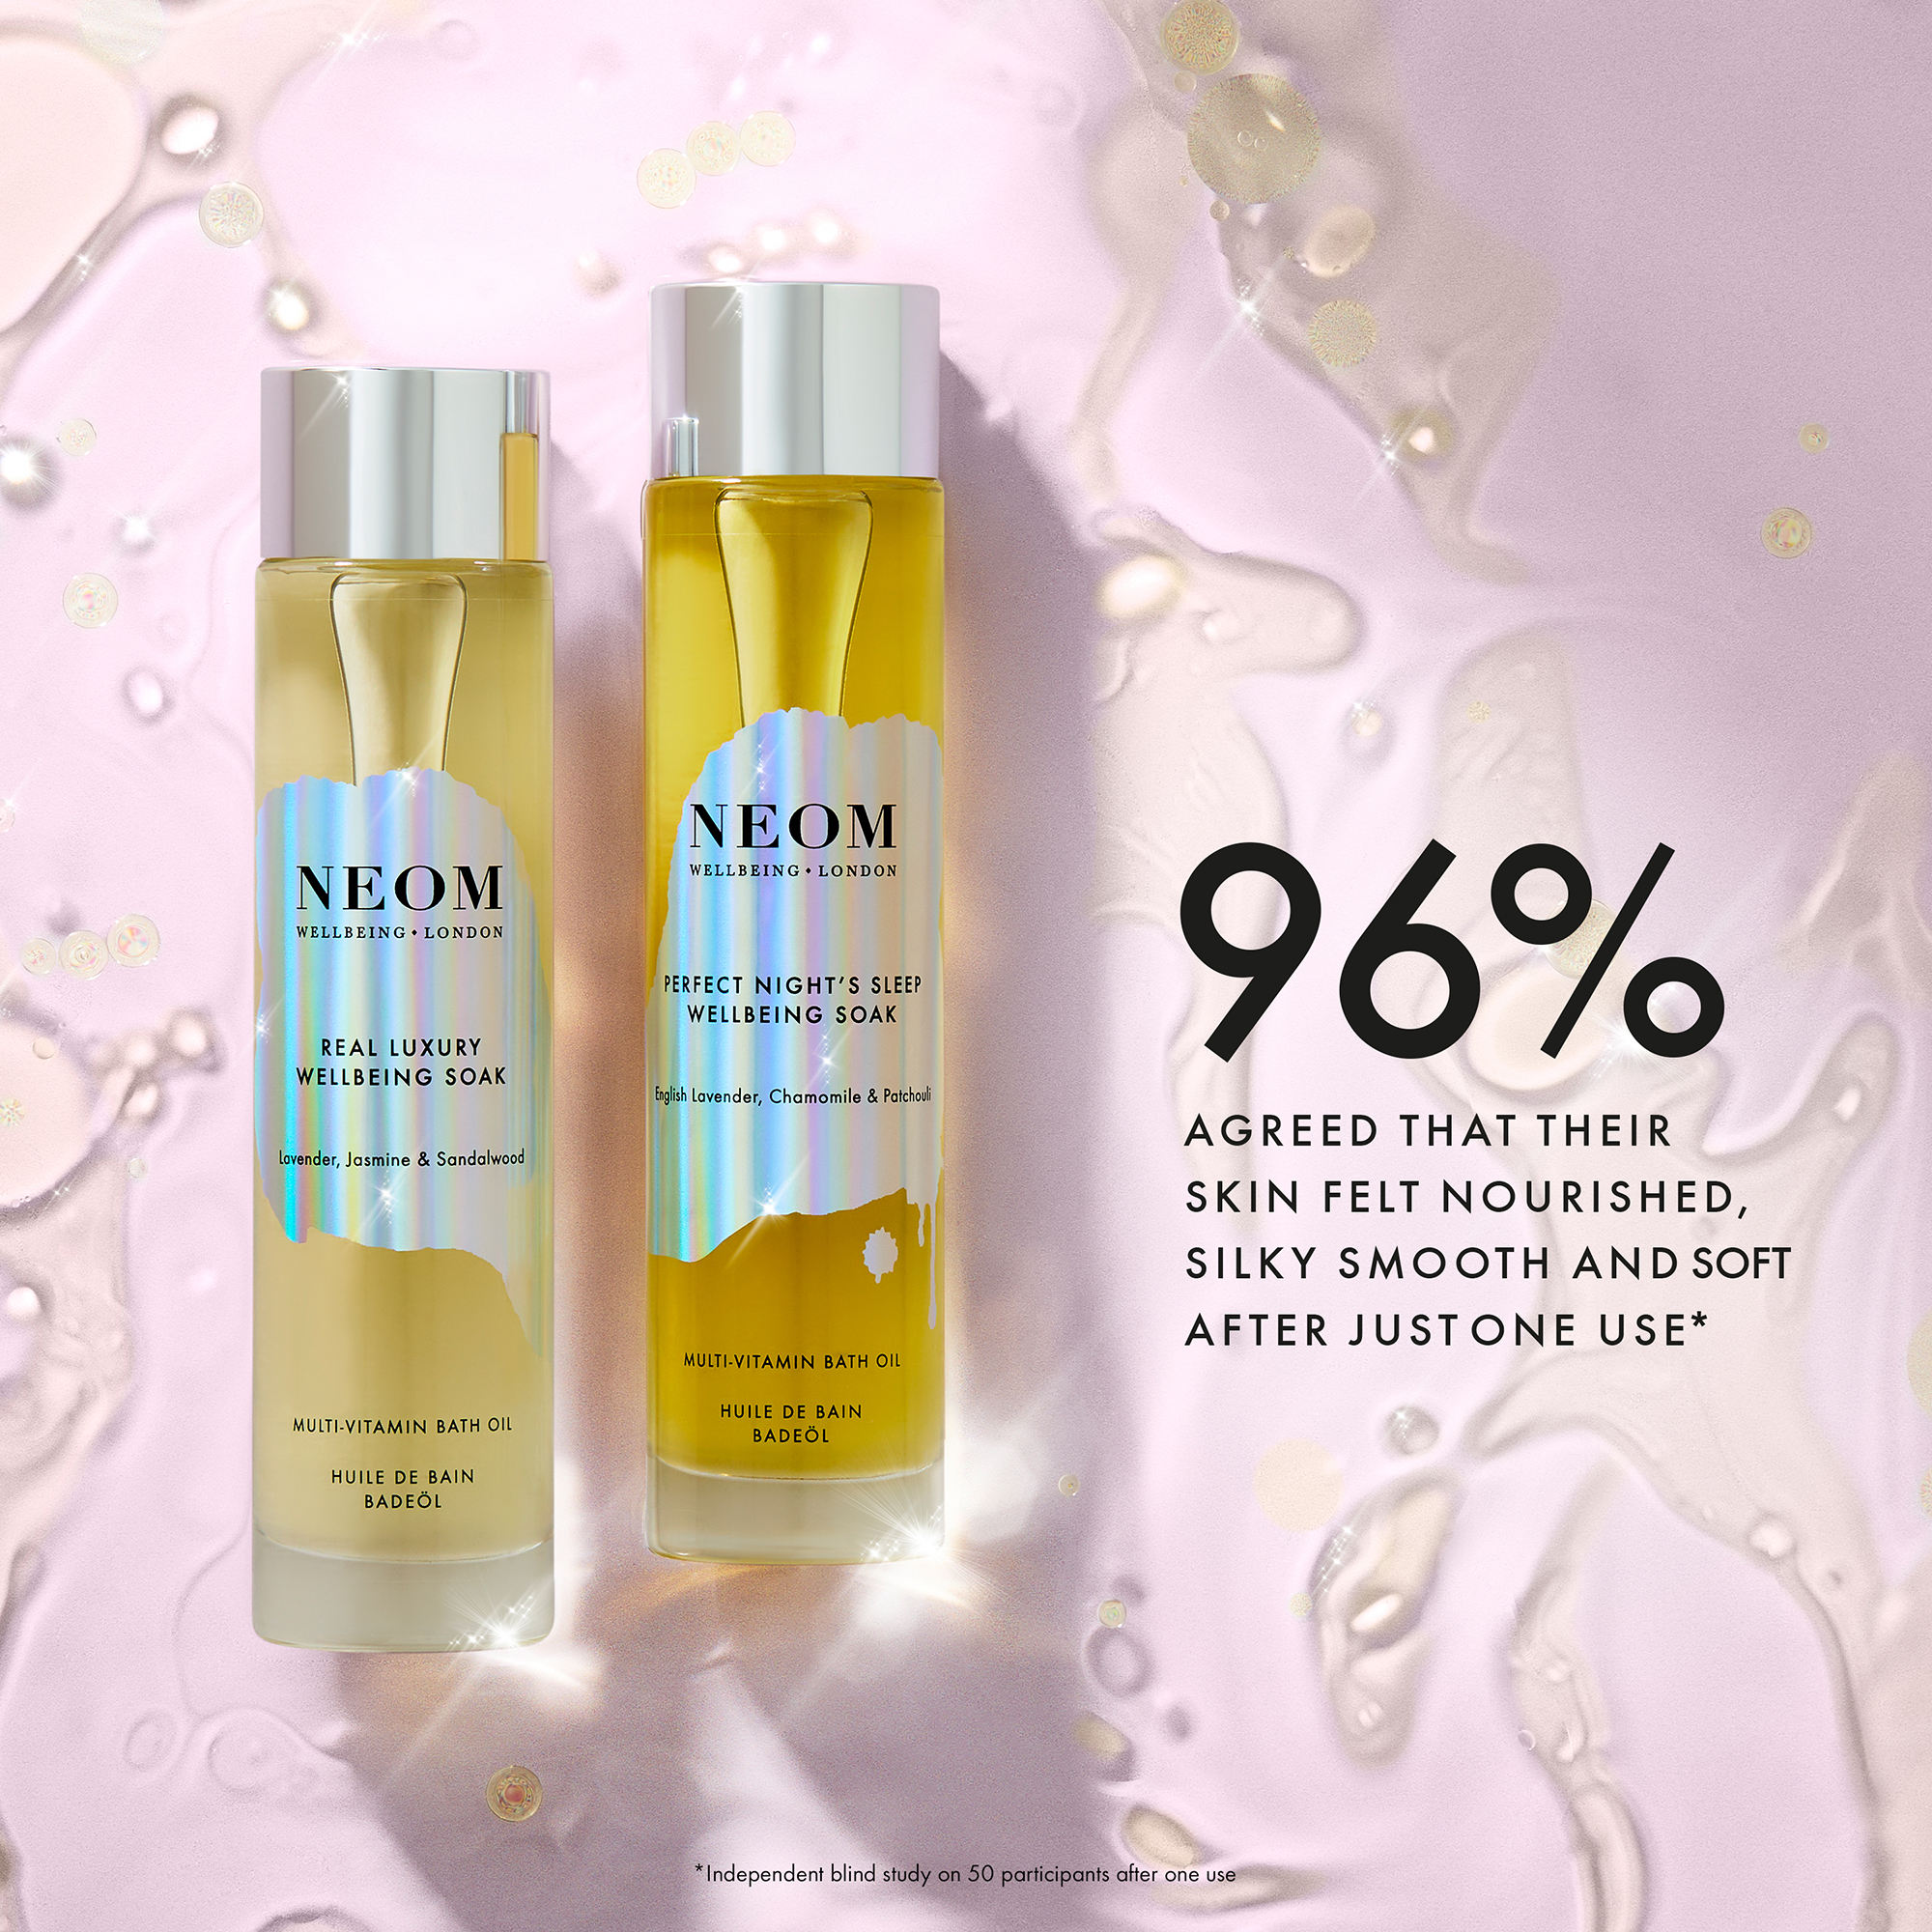 NEOM NEOM REAL LUXURY WELLBEING SOAK VITAMIN BATH ELECT NIGHT'S SUD WELLBEING SOAK KASVITAMIN BATH LAIN RADIO 96% AGREED THAT THEIR SKIN FELT NOURISHED, SILKY SMOOTH AND SOFT AFTER JUST ONE USE* MADEOL "Independe blindady on 50 porciones ober one use